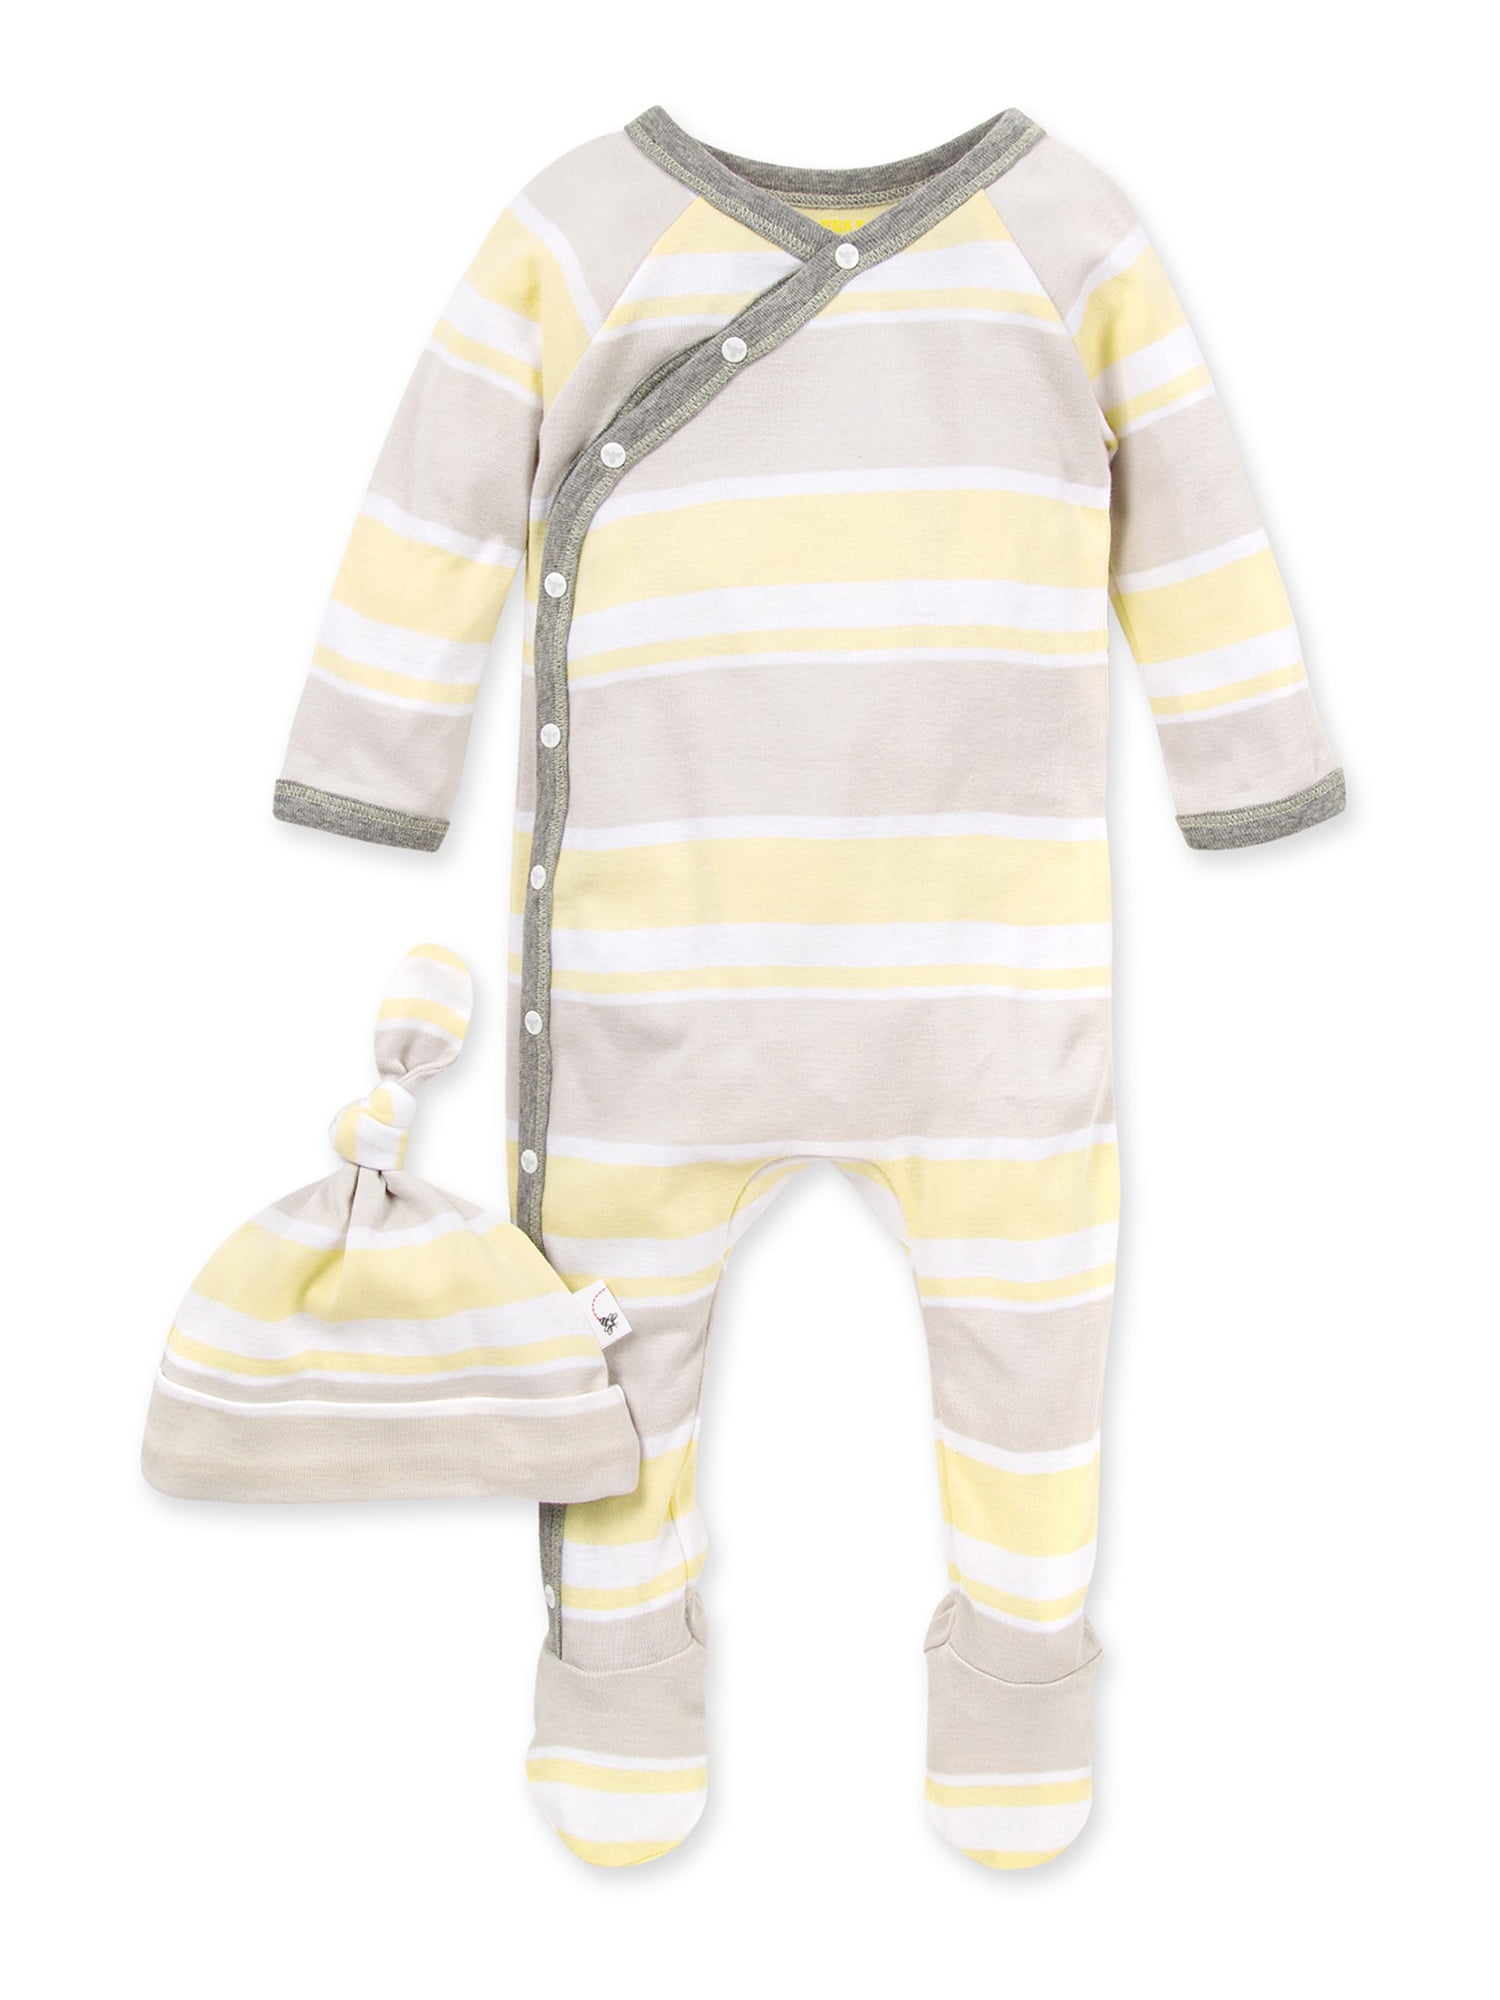 Burts Bees Baby Boy Organic Coverall Hat Set Size 9 12 18 24 Months Gray Striped 